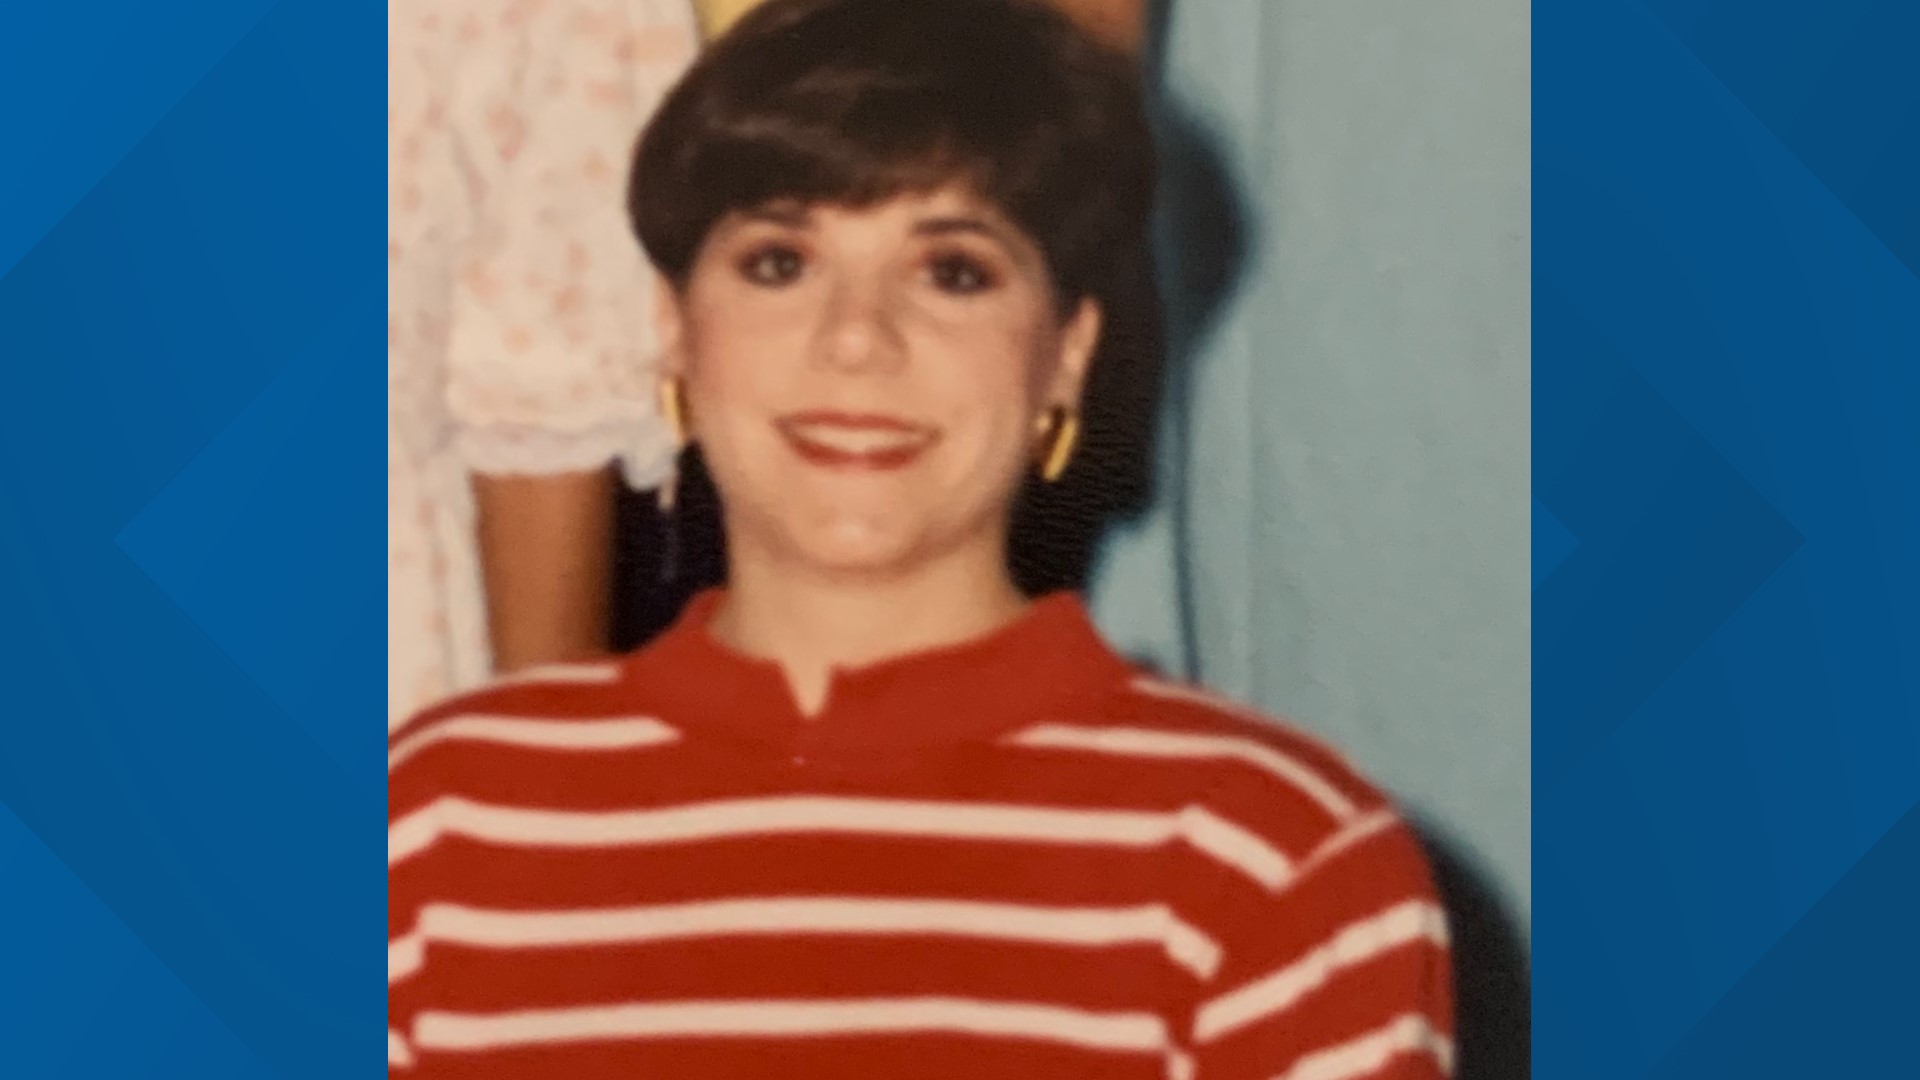 Dna Evidence Leads To Arrest In 1995 Murder Of Beaumont Teacher 